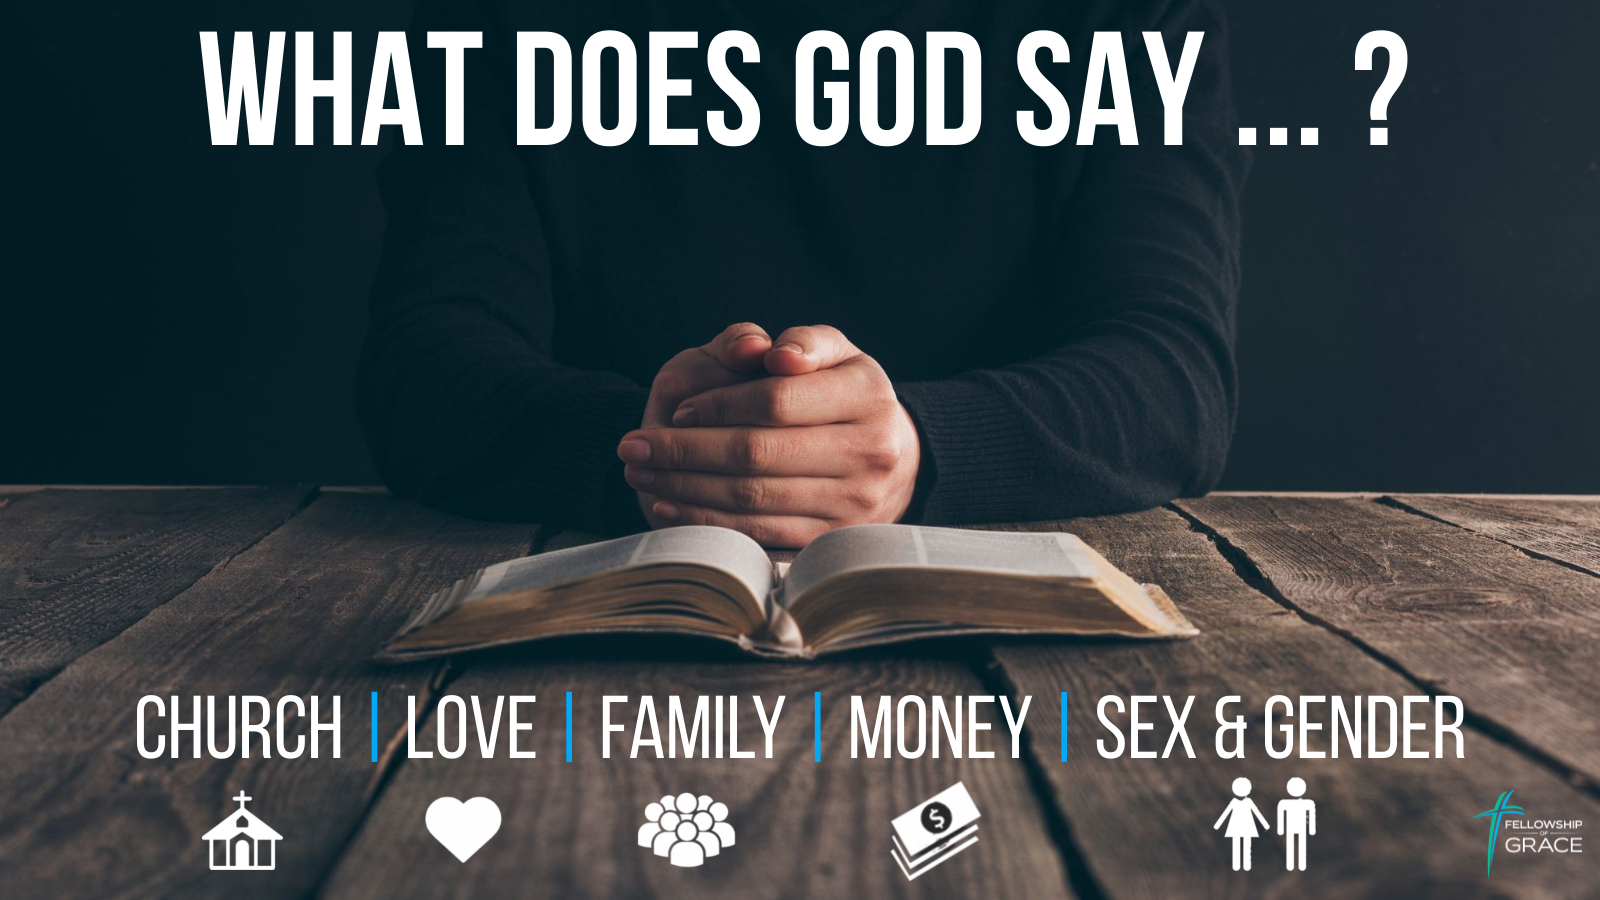 What Does God Say ... ? banner